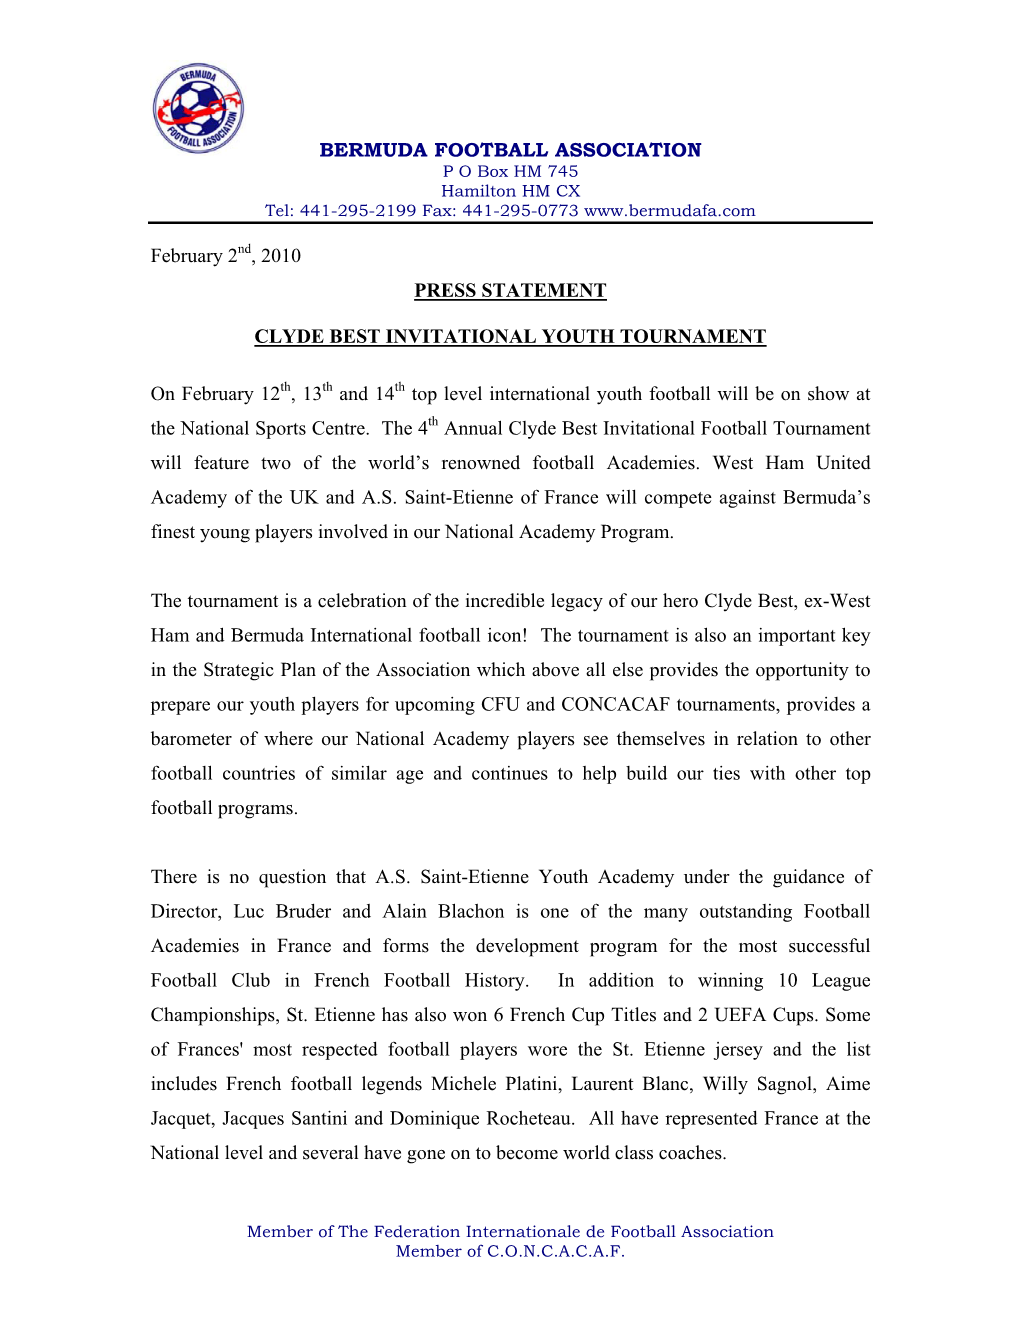 BERMUDA FOOTBALL ASSOCIATION February 2 , 2010 PRESS STATEMENT CLYDE BEST INVITATIONAL YOUTH TOURNAMENT on February 12 , 13